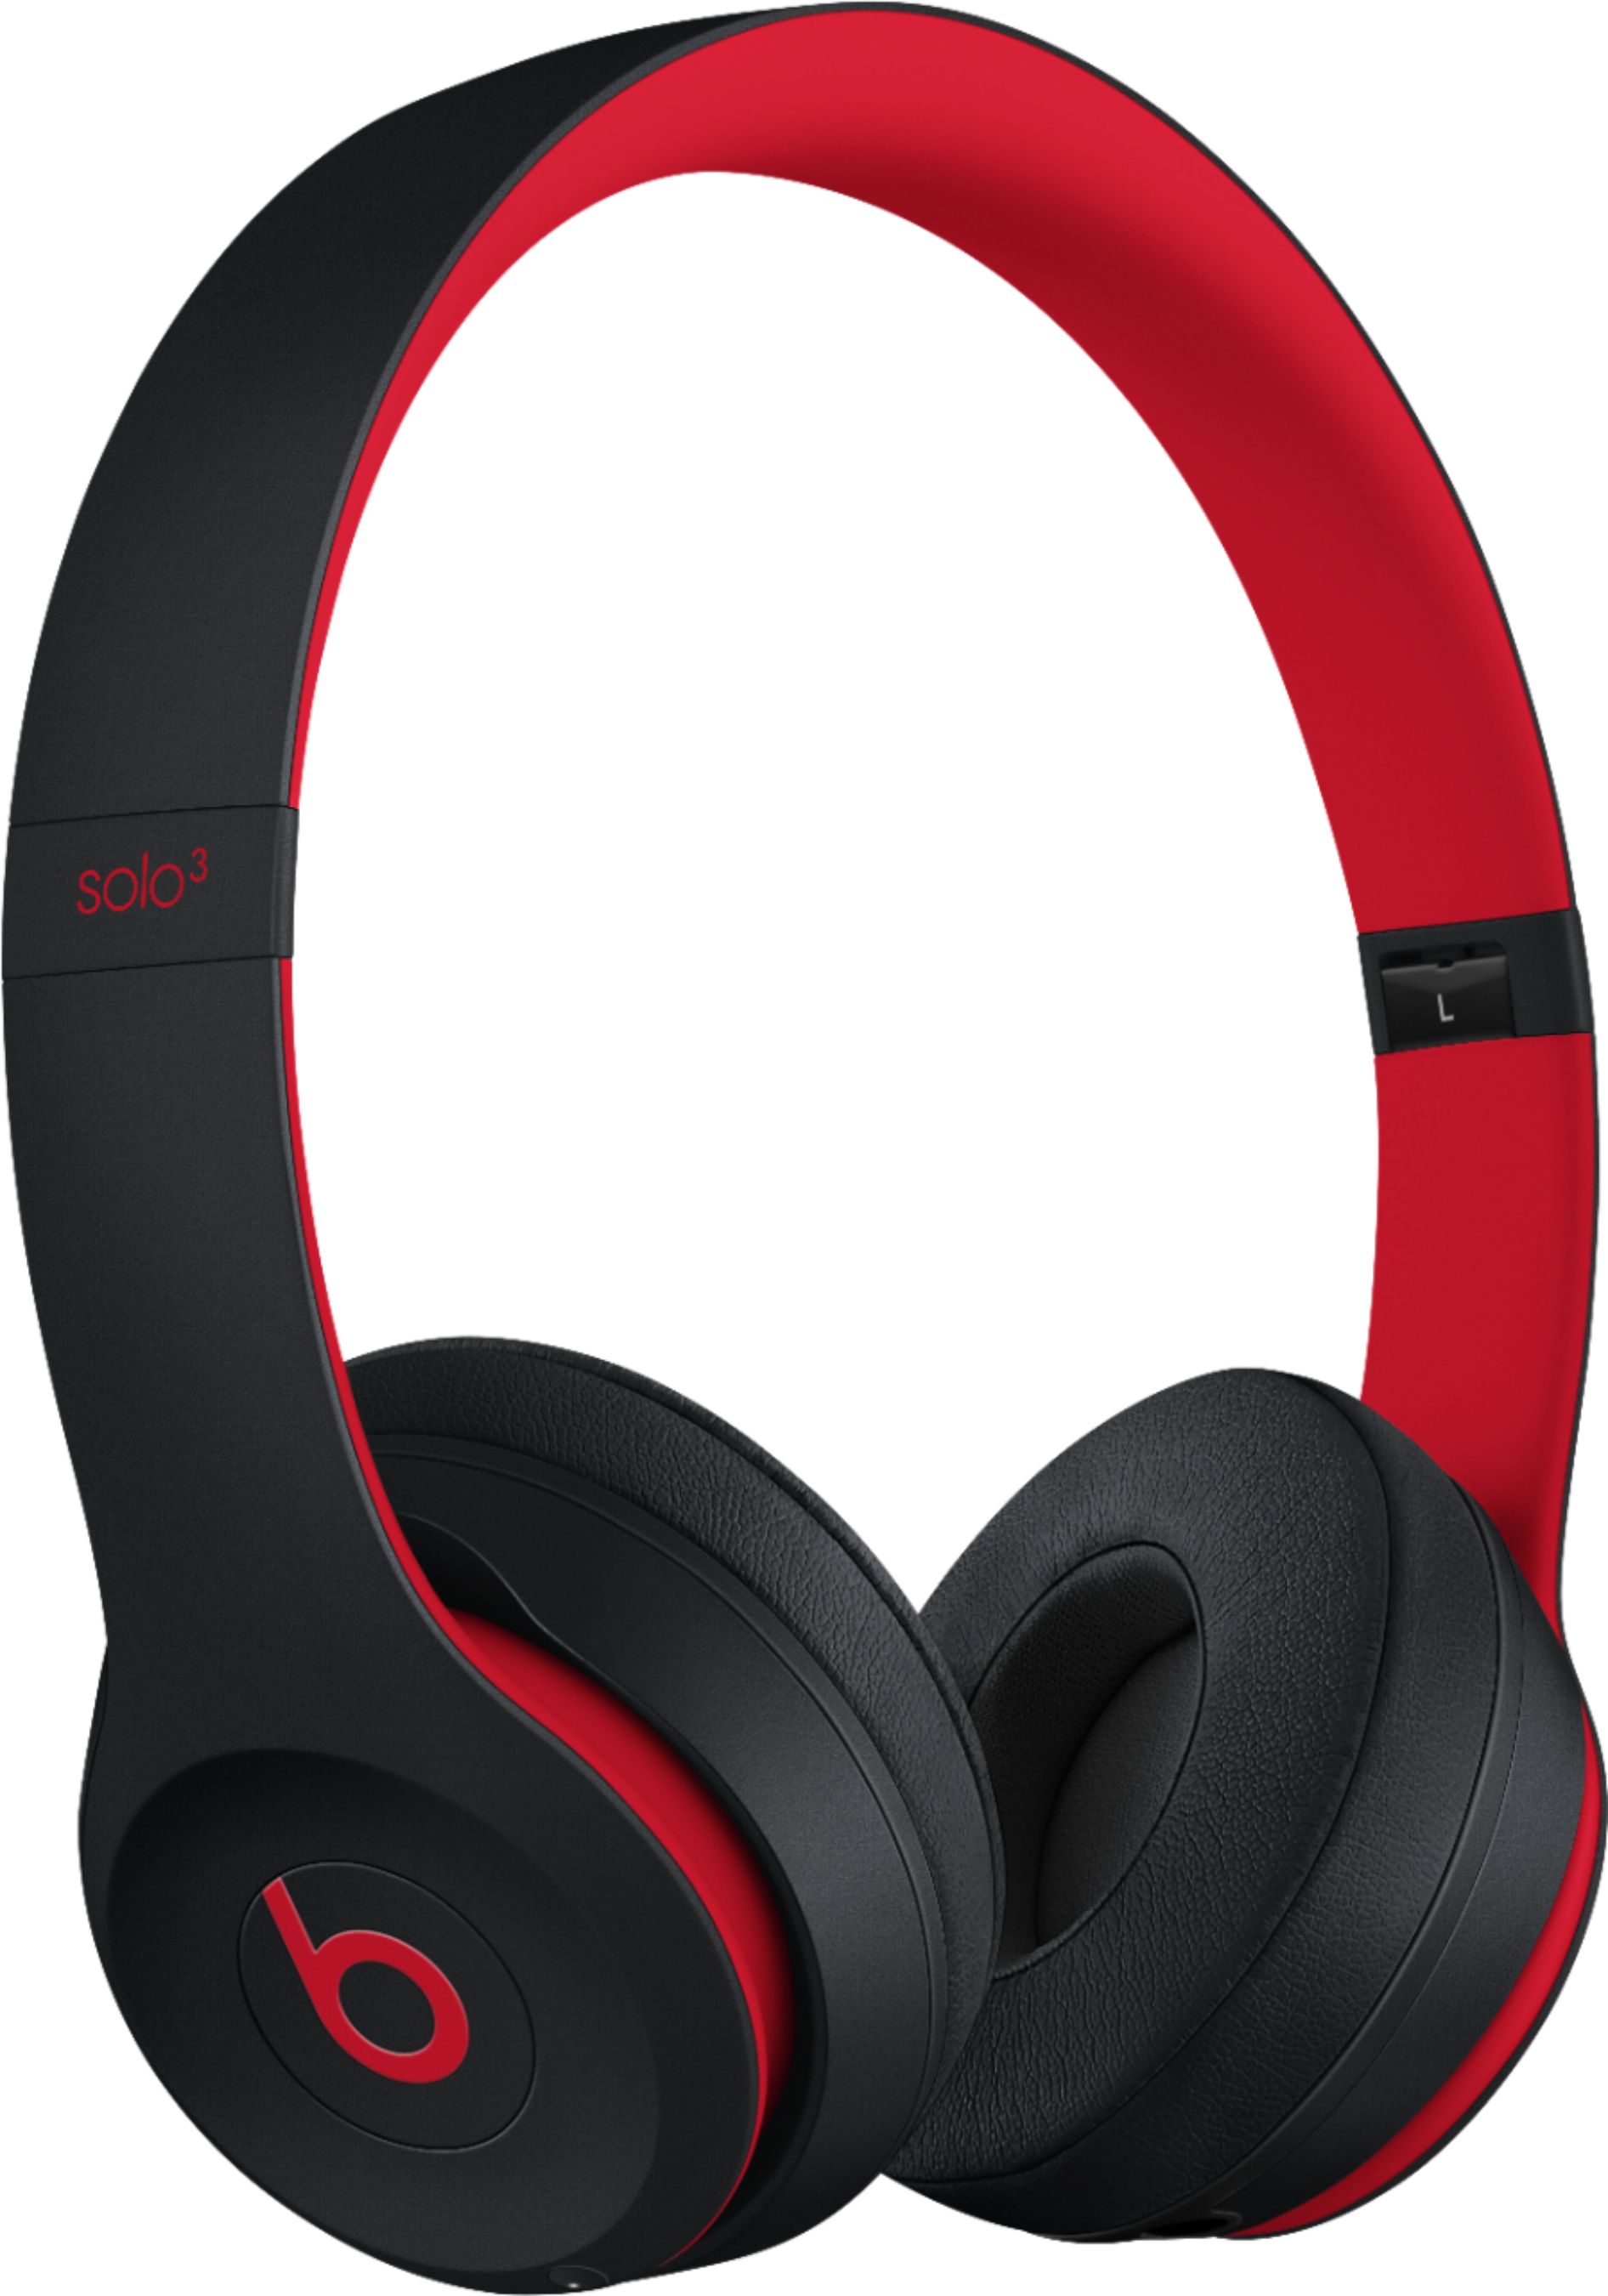 beats by dr dre white and red